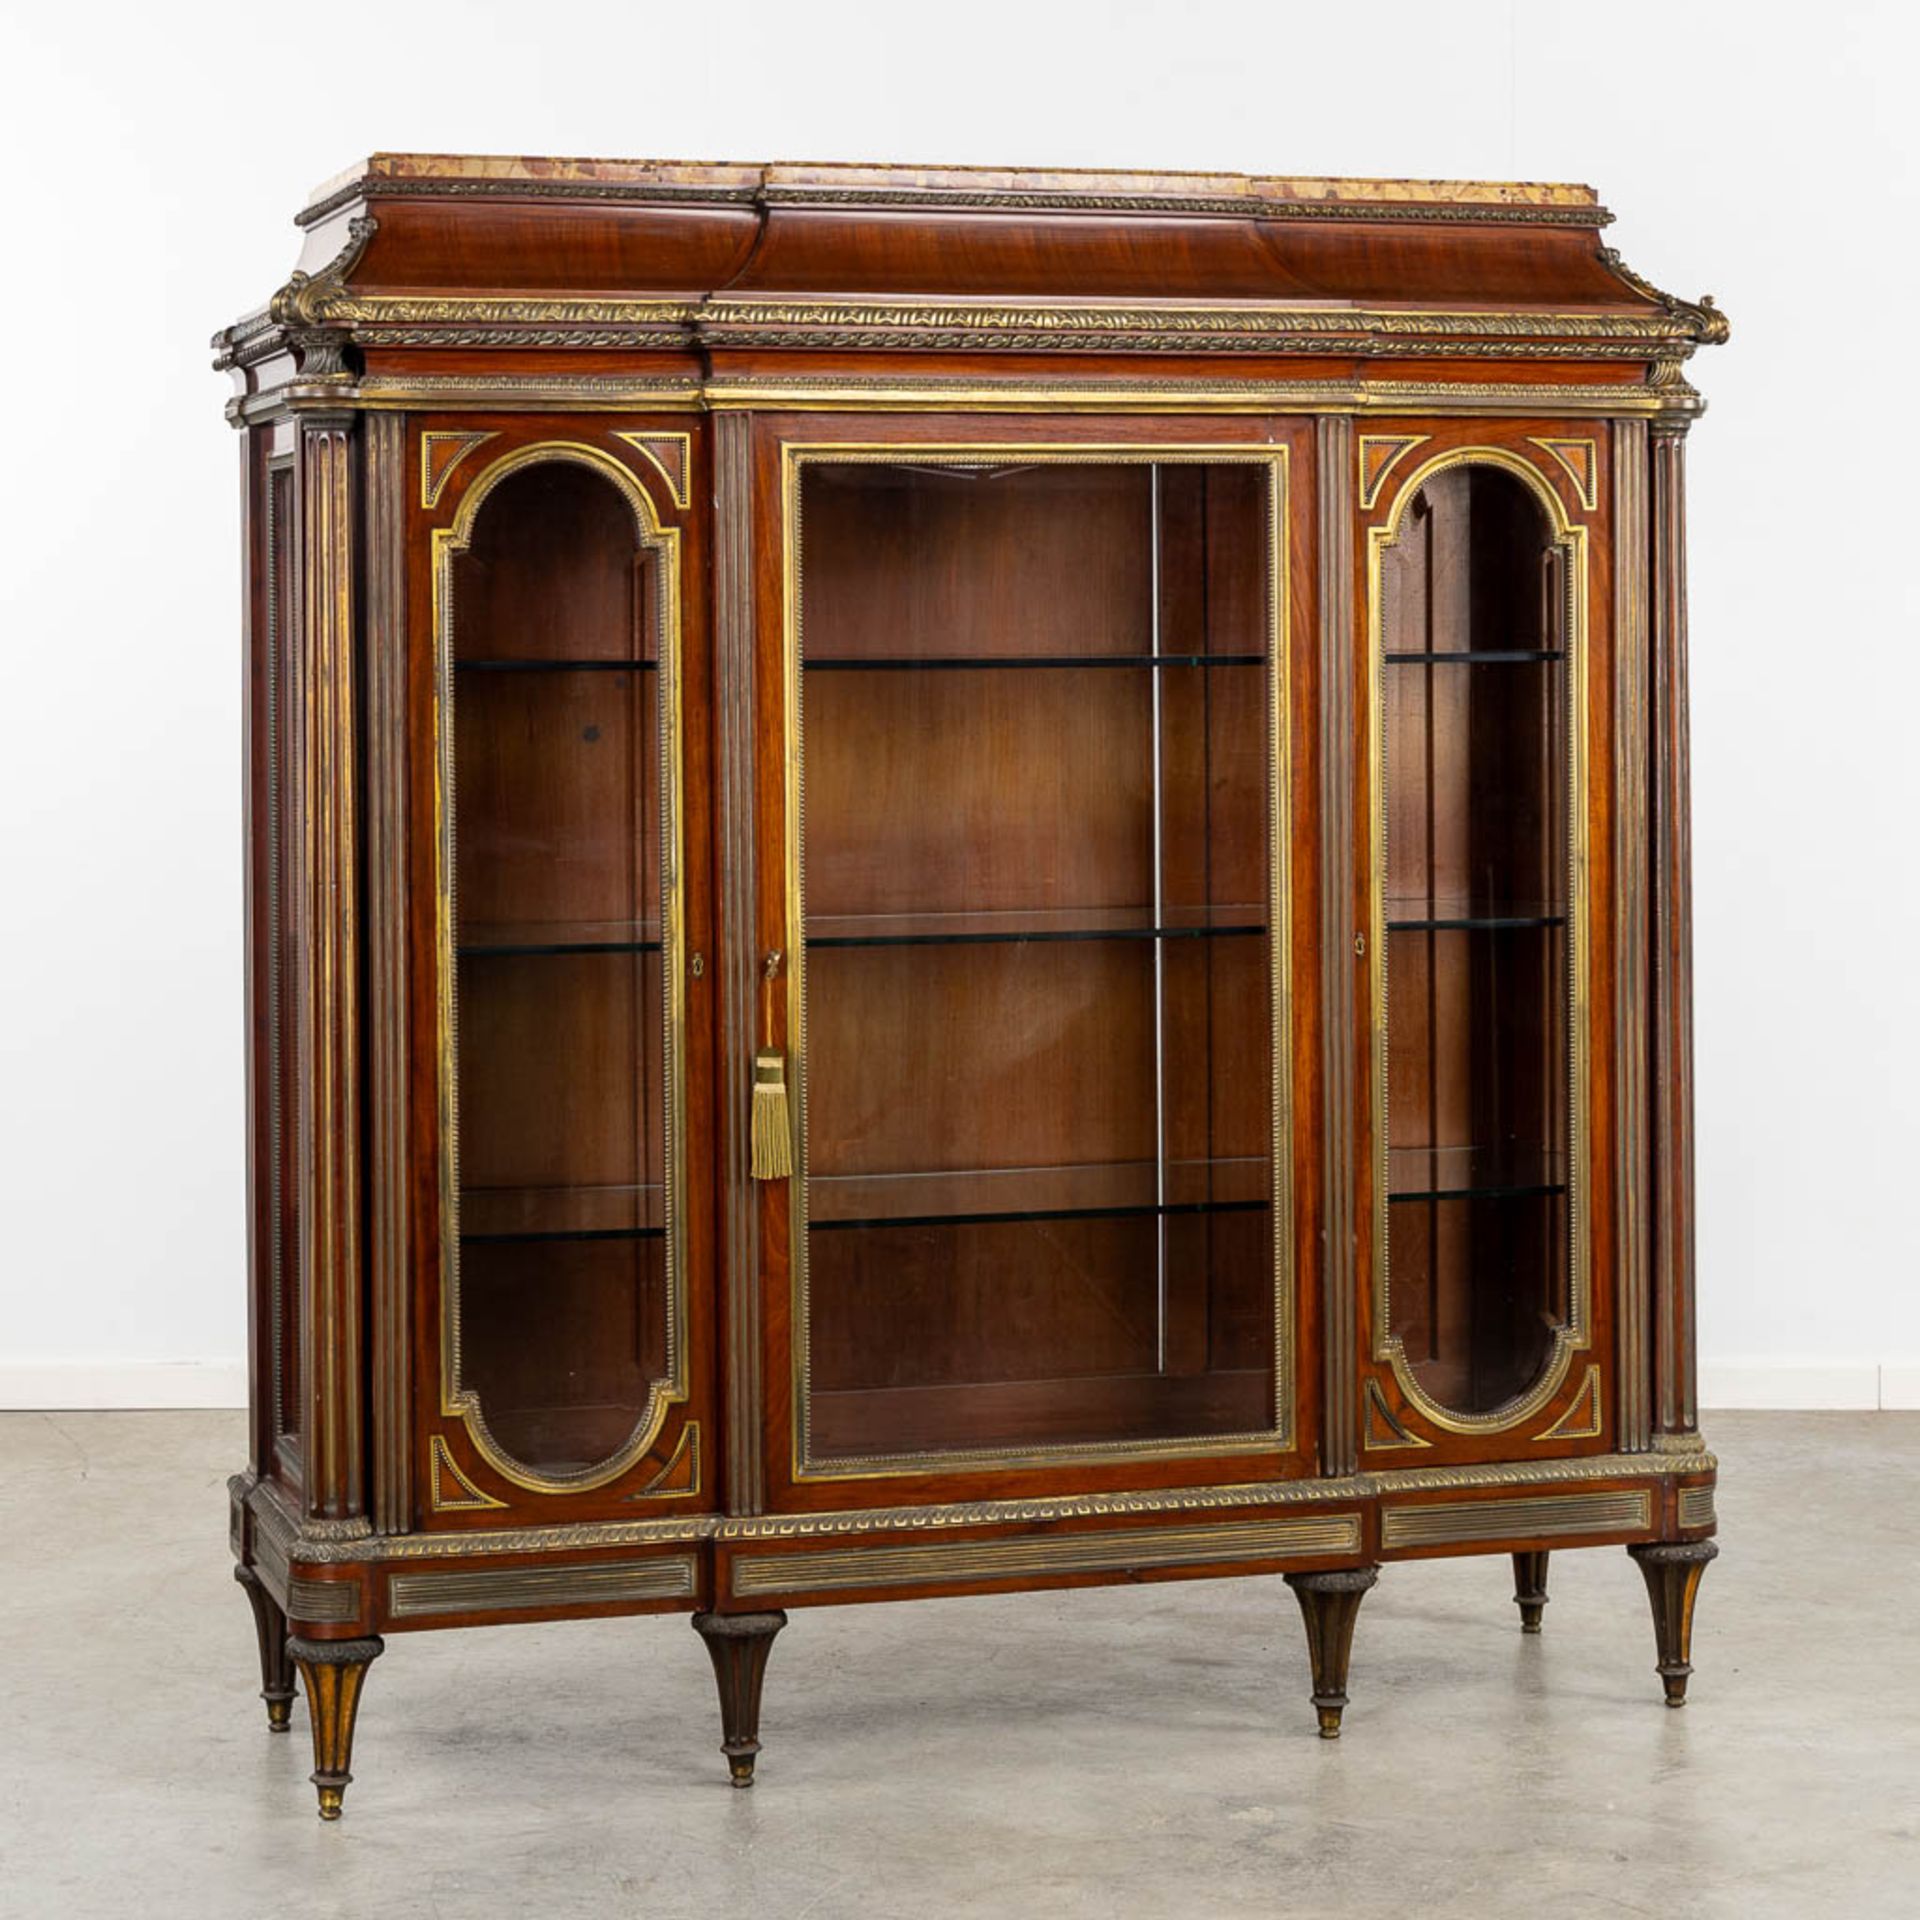 An exceptional display cabinet, richly mounted with bronze and a Breche D'alep marble top. Circa 188